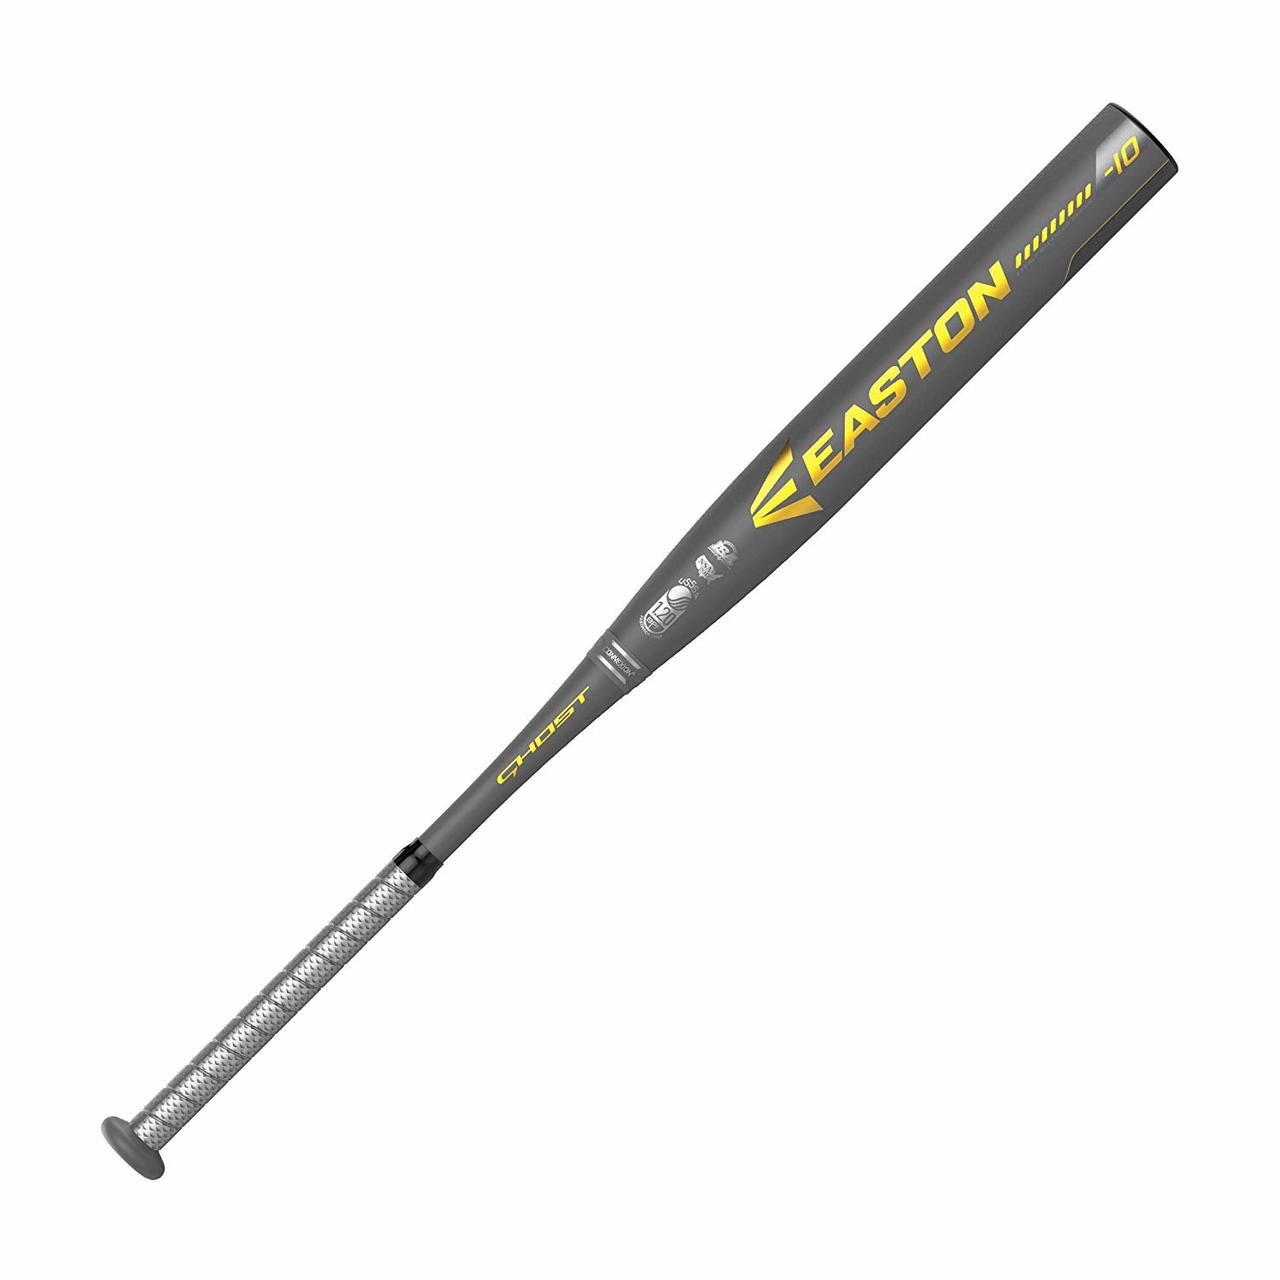 easton-ghost-usssa-fastpitch-softball-bat-32-in-22-oz-fp19ghu10 FP19GHU10-3222 Easton 628412219553 Patent-pending DOUBLE BARREL construction is the ultimate combination of feel pop